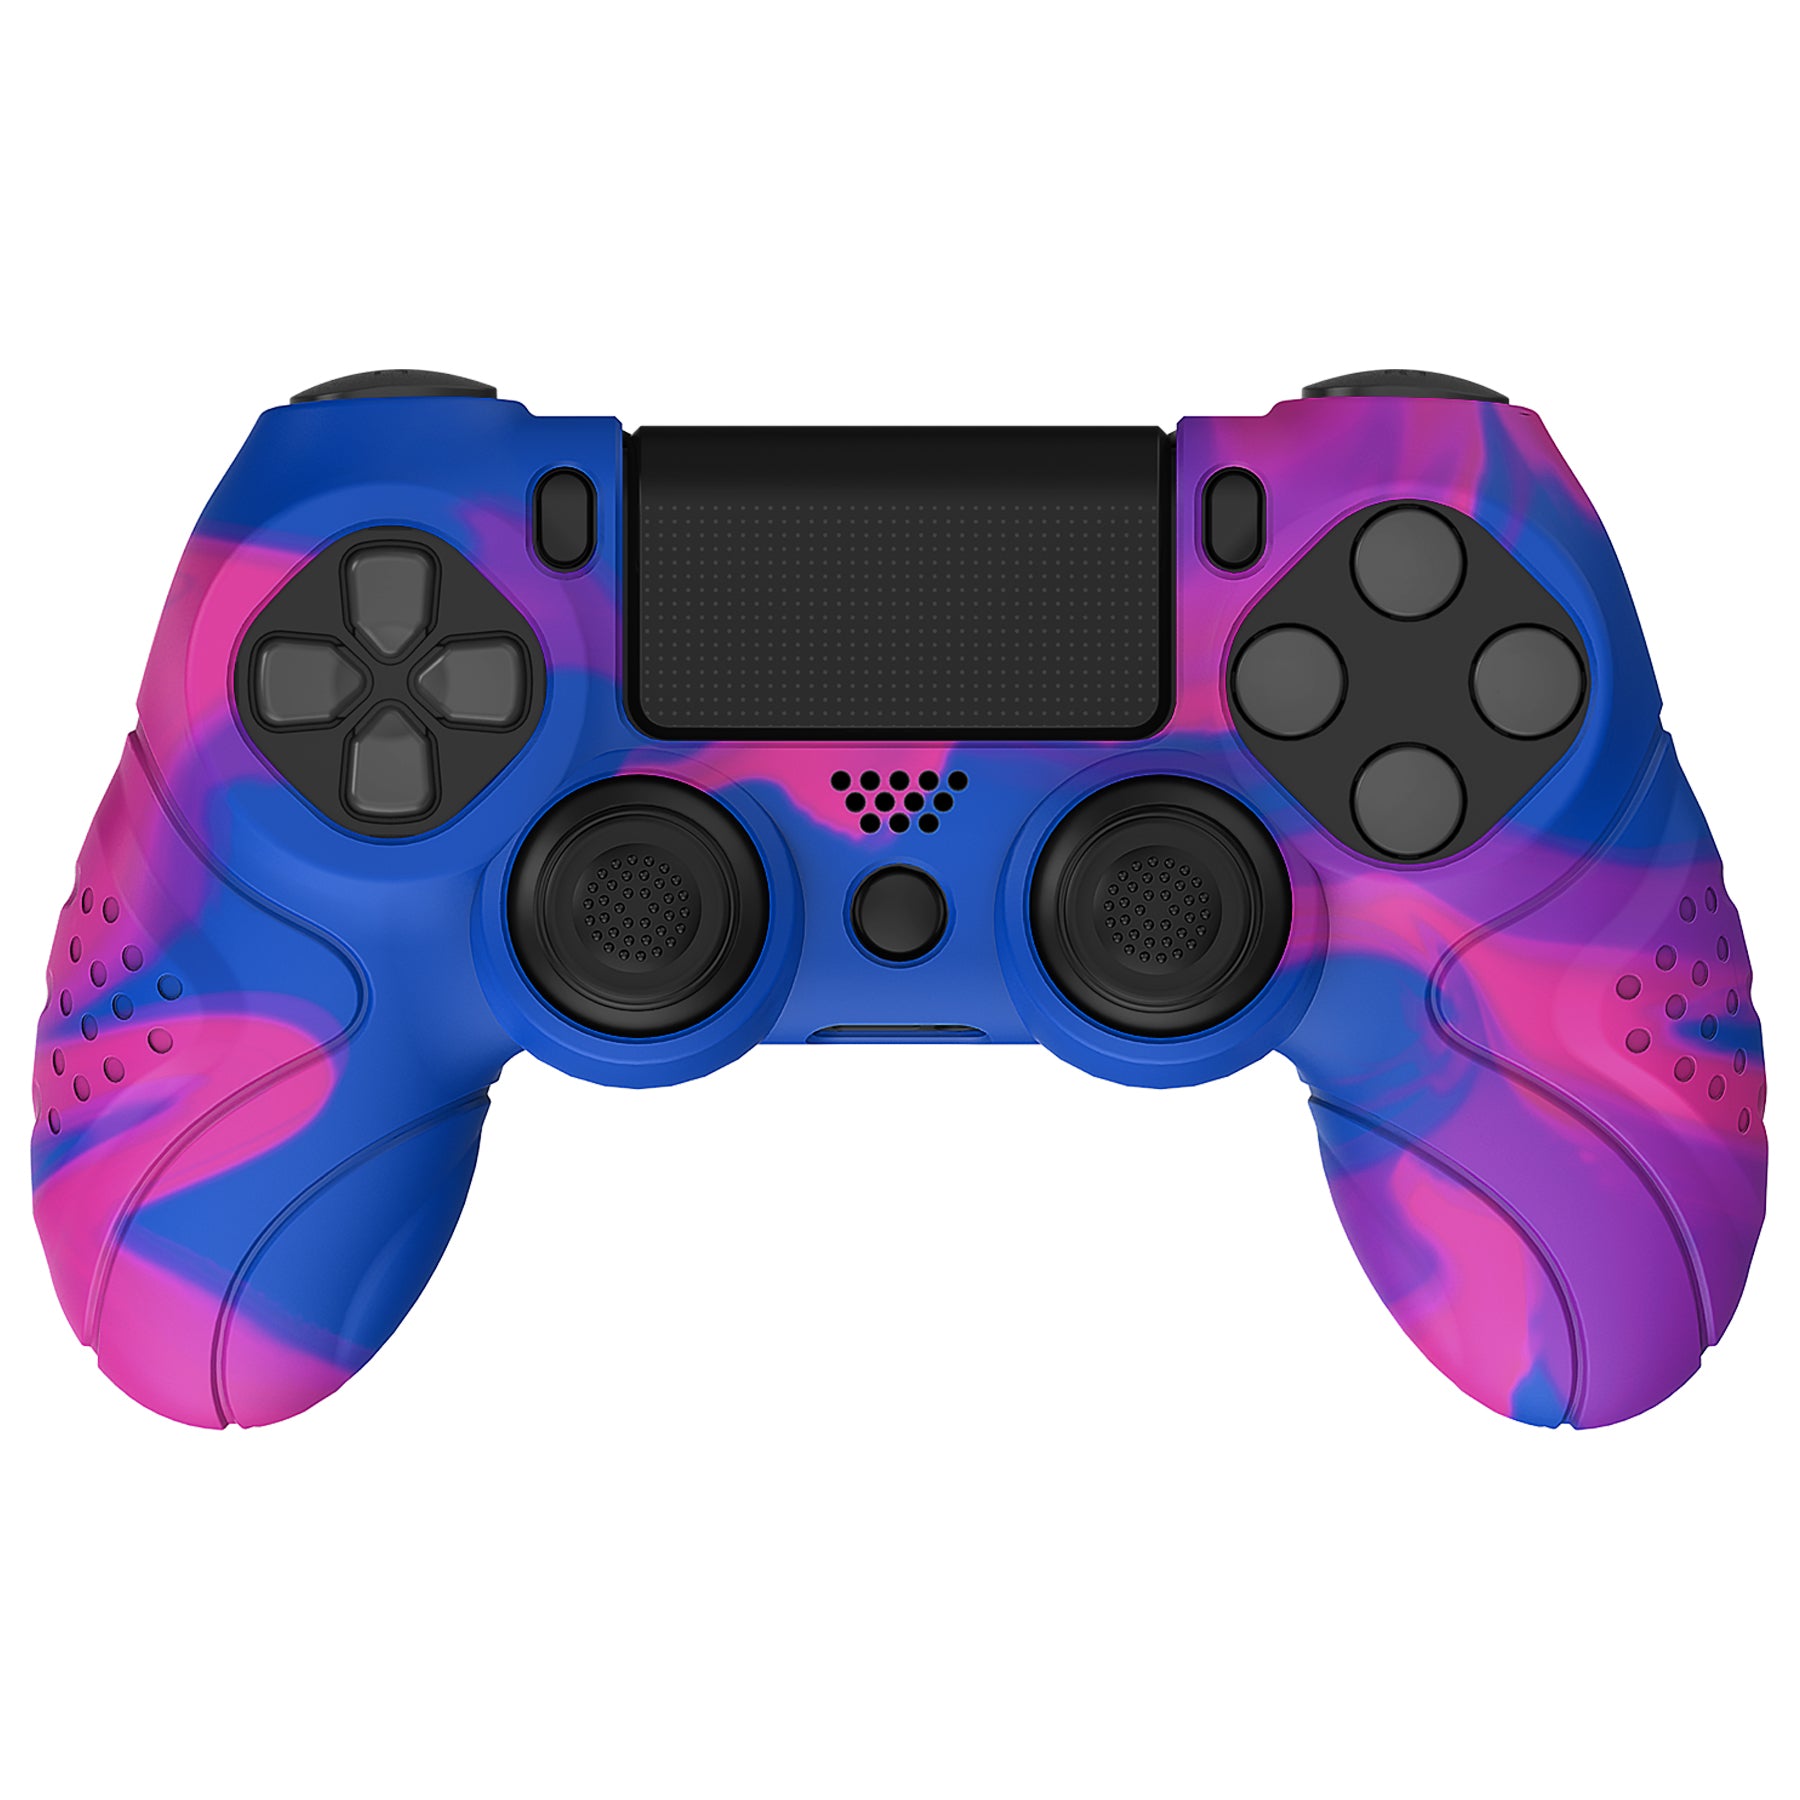 PlayVital Guardian Edition Pink & Purple & Blue Ergonomic Soft Anti-Slip Controller Silicone Case Cover for ps4, Rubber Protector Skin with Joystick Caps for ps4 Slim/Pro Controller - P4CC0072 playvital